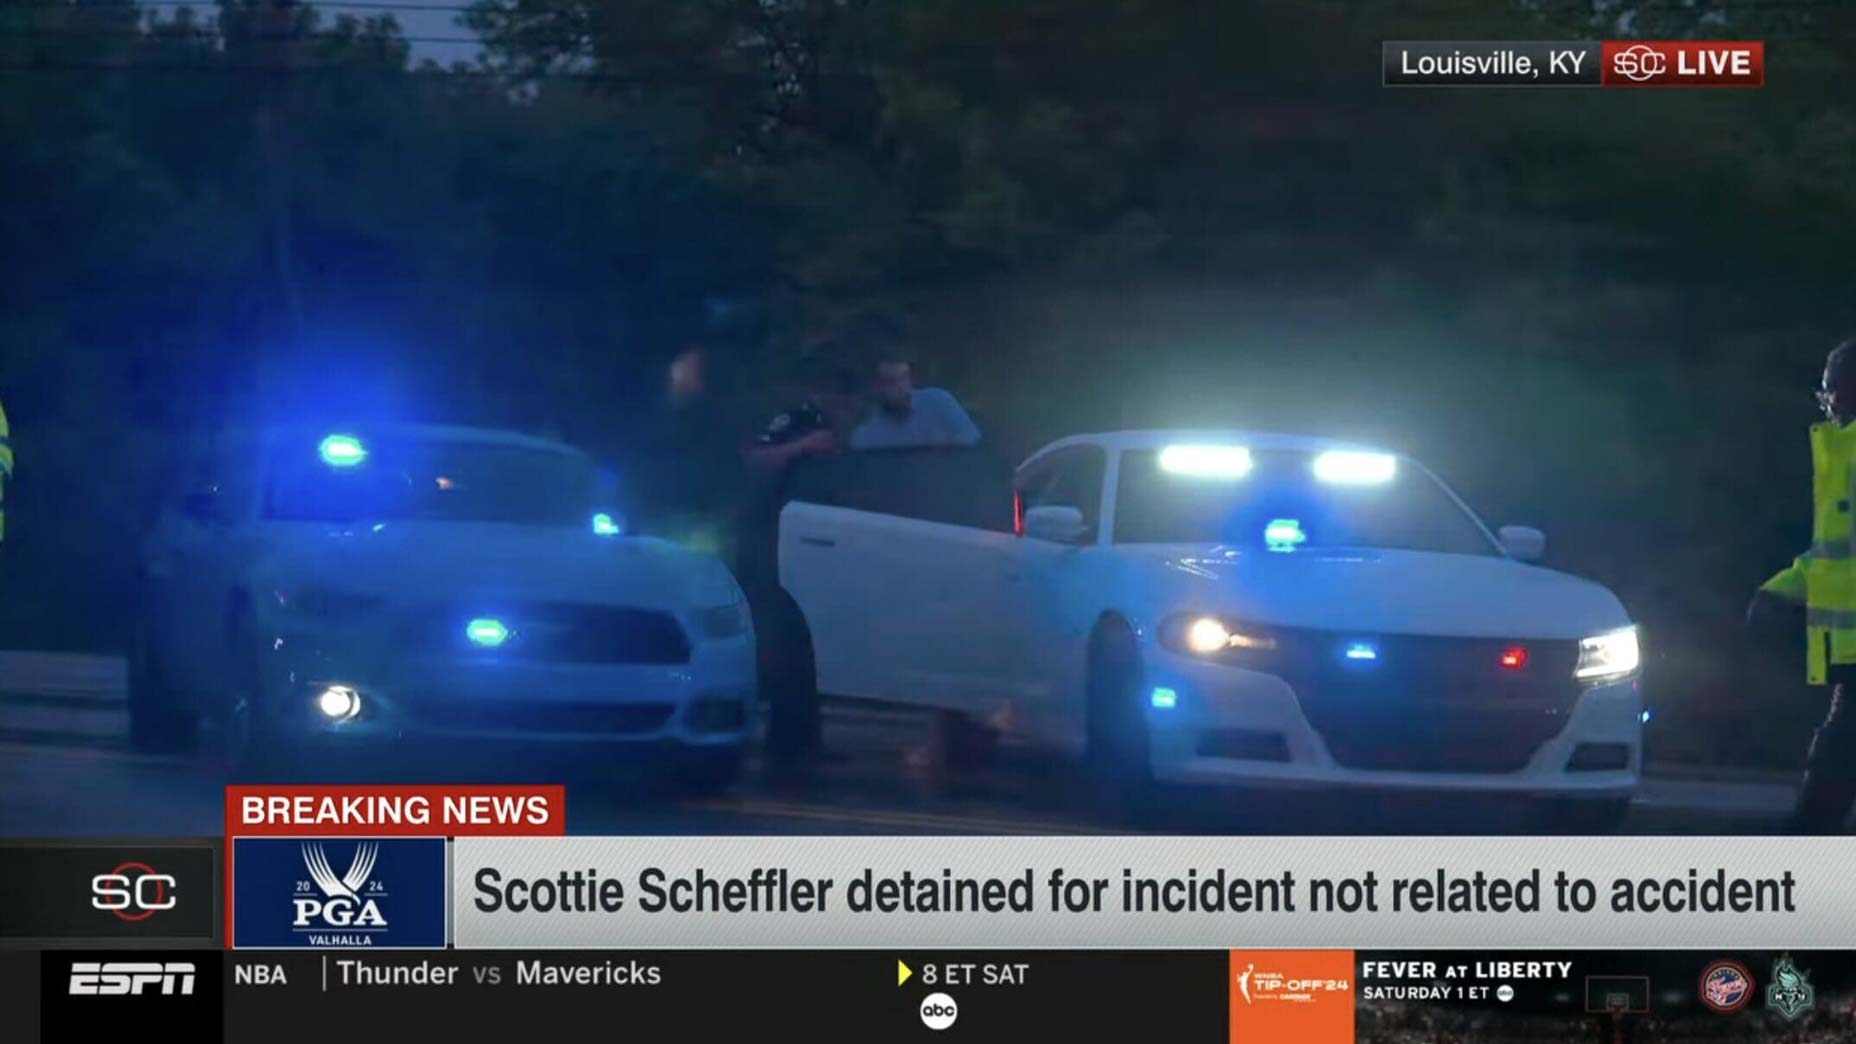 ESPN shared this image allegedly showing Scottie Scheffler detained by police Friday morning at Valhalla at 2024 PGA Championship